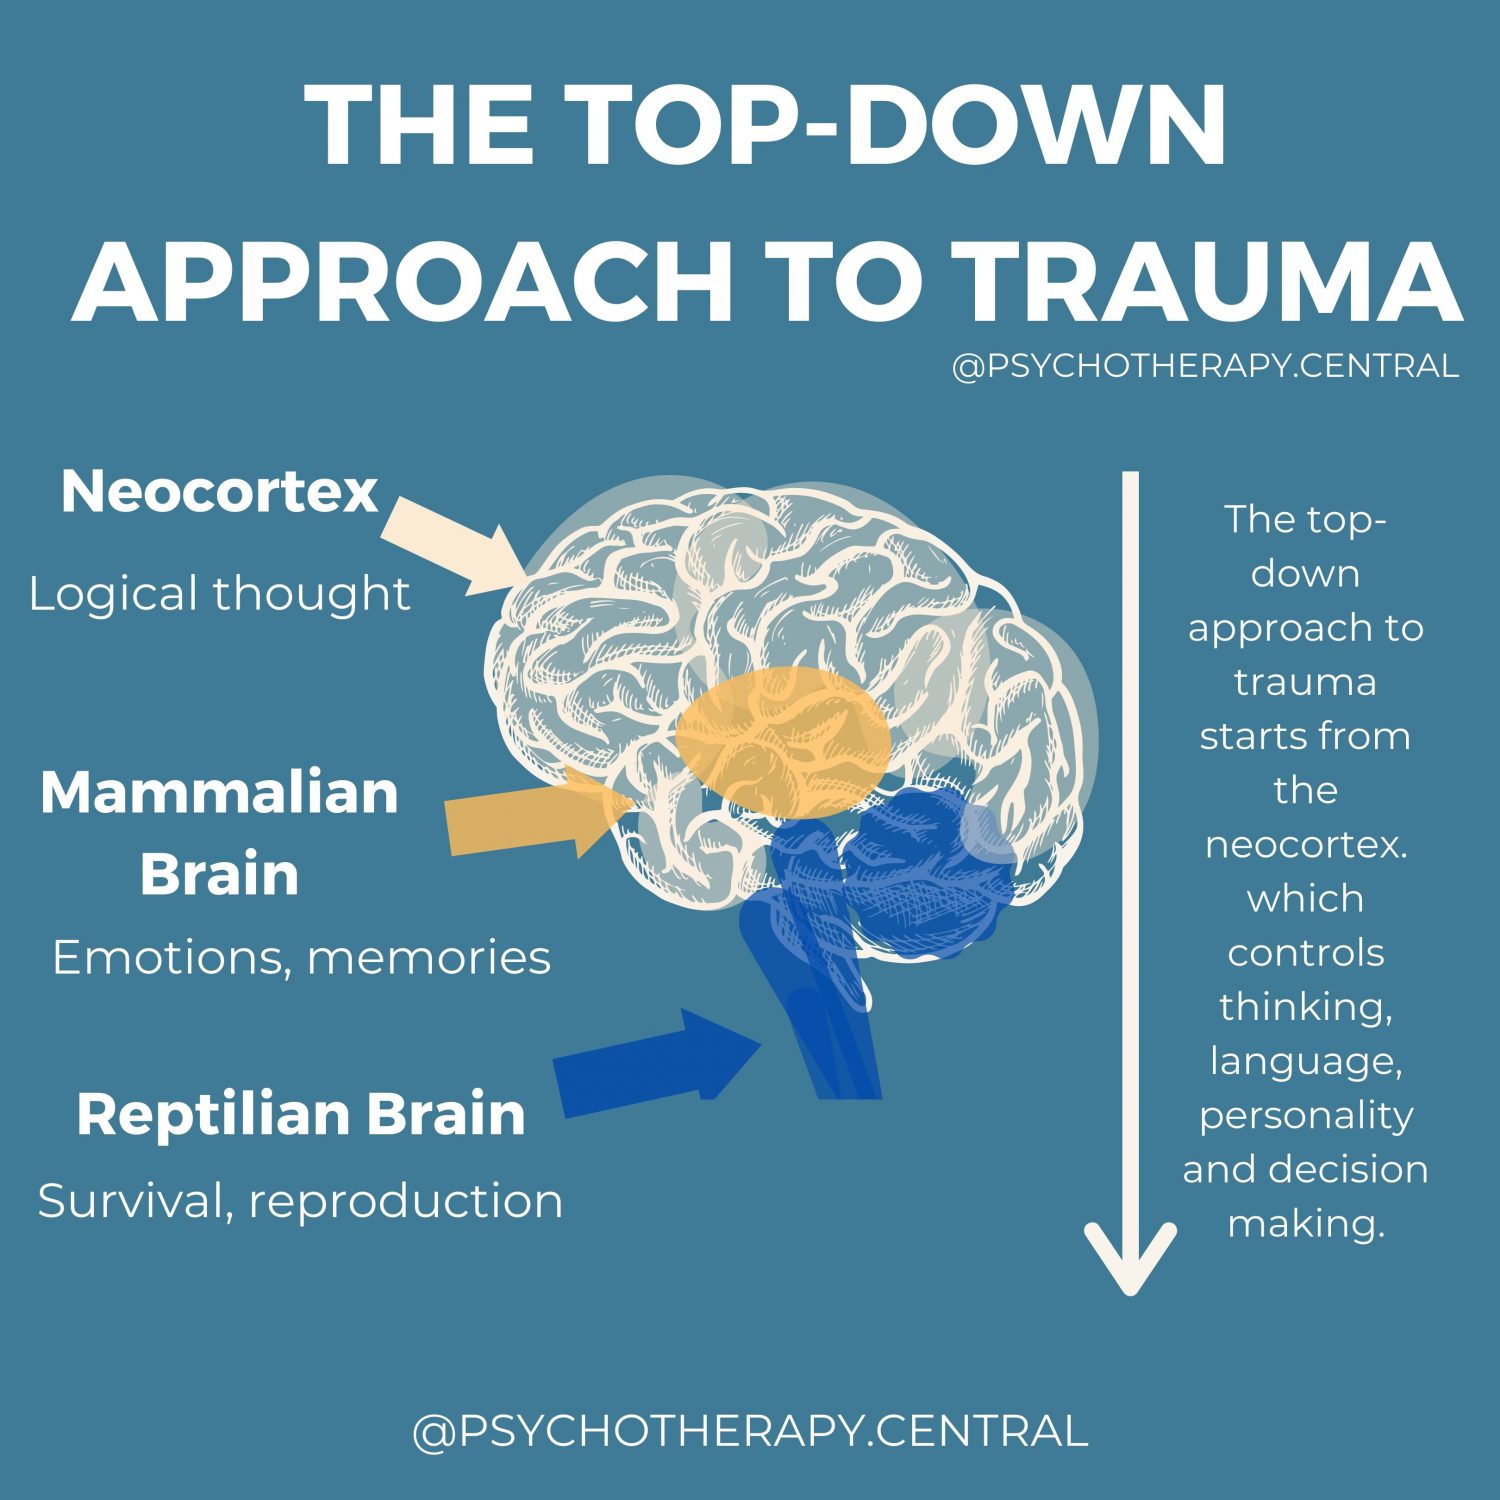 THE TOP-DOWN APPROACH TO TRAUMA